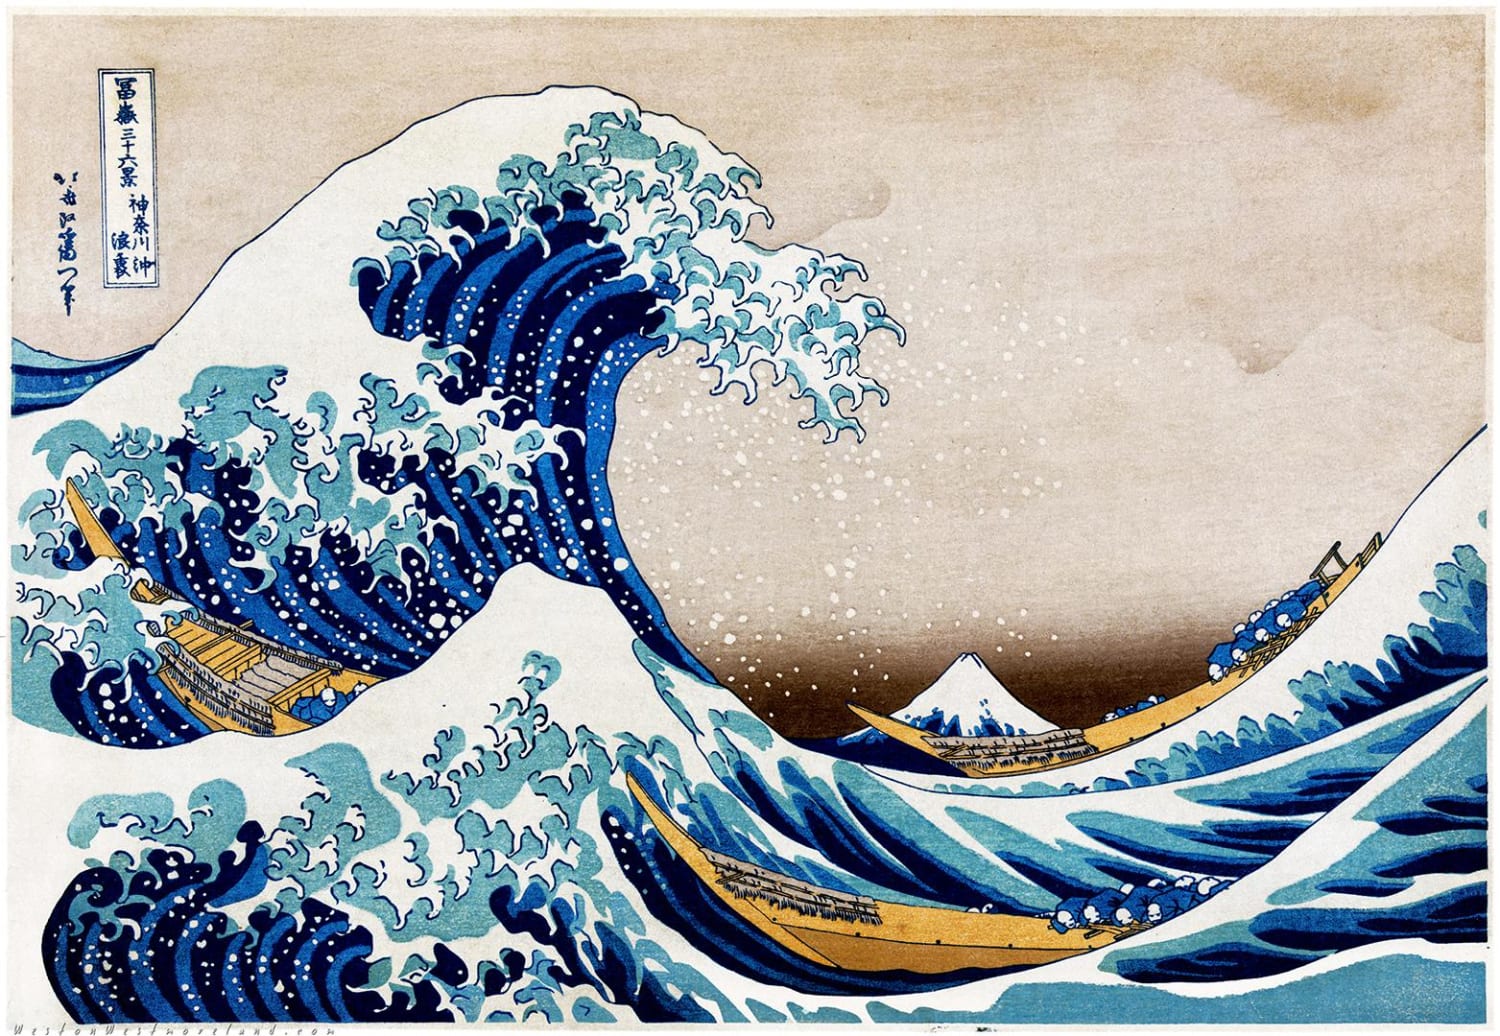 The Great Wave off Kanagawa, a woodblock print by Japanese artist Hokusai. Published around 1830 as the first in the series "36 Views of Mount Fuji", it is Hokusai's most famous work and is often considered the most recognizable work of Japanese art in the world... (more in comments)(